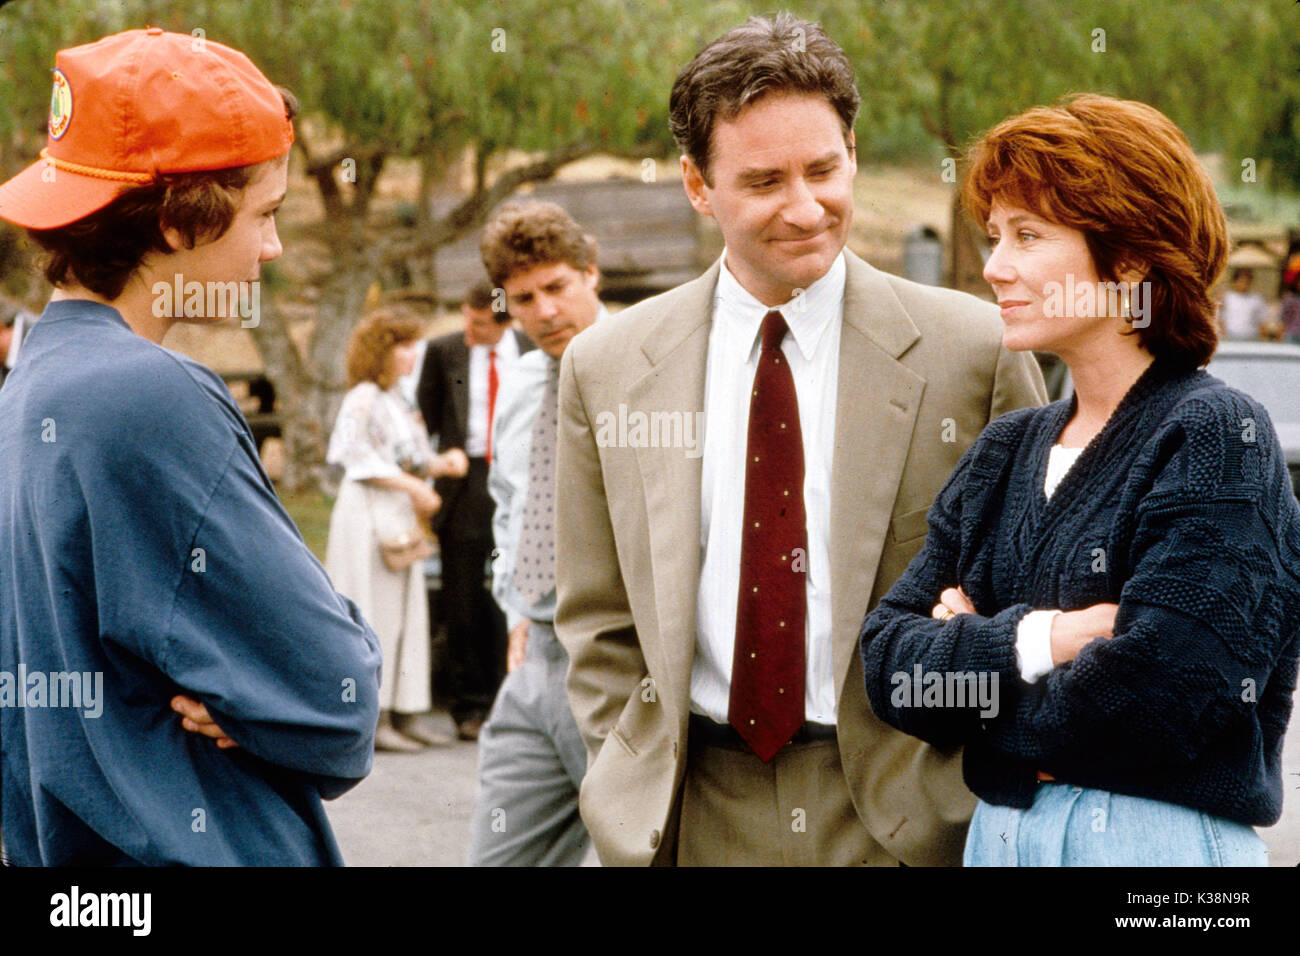 GRAND CANYON Kevin Kline, Mary McDONNELL (rechts) Datum: 1991 Stockfoto